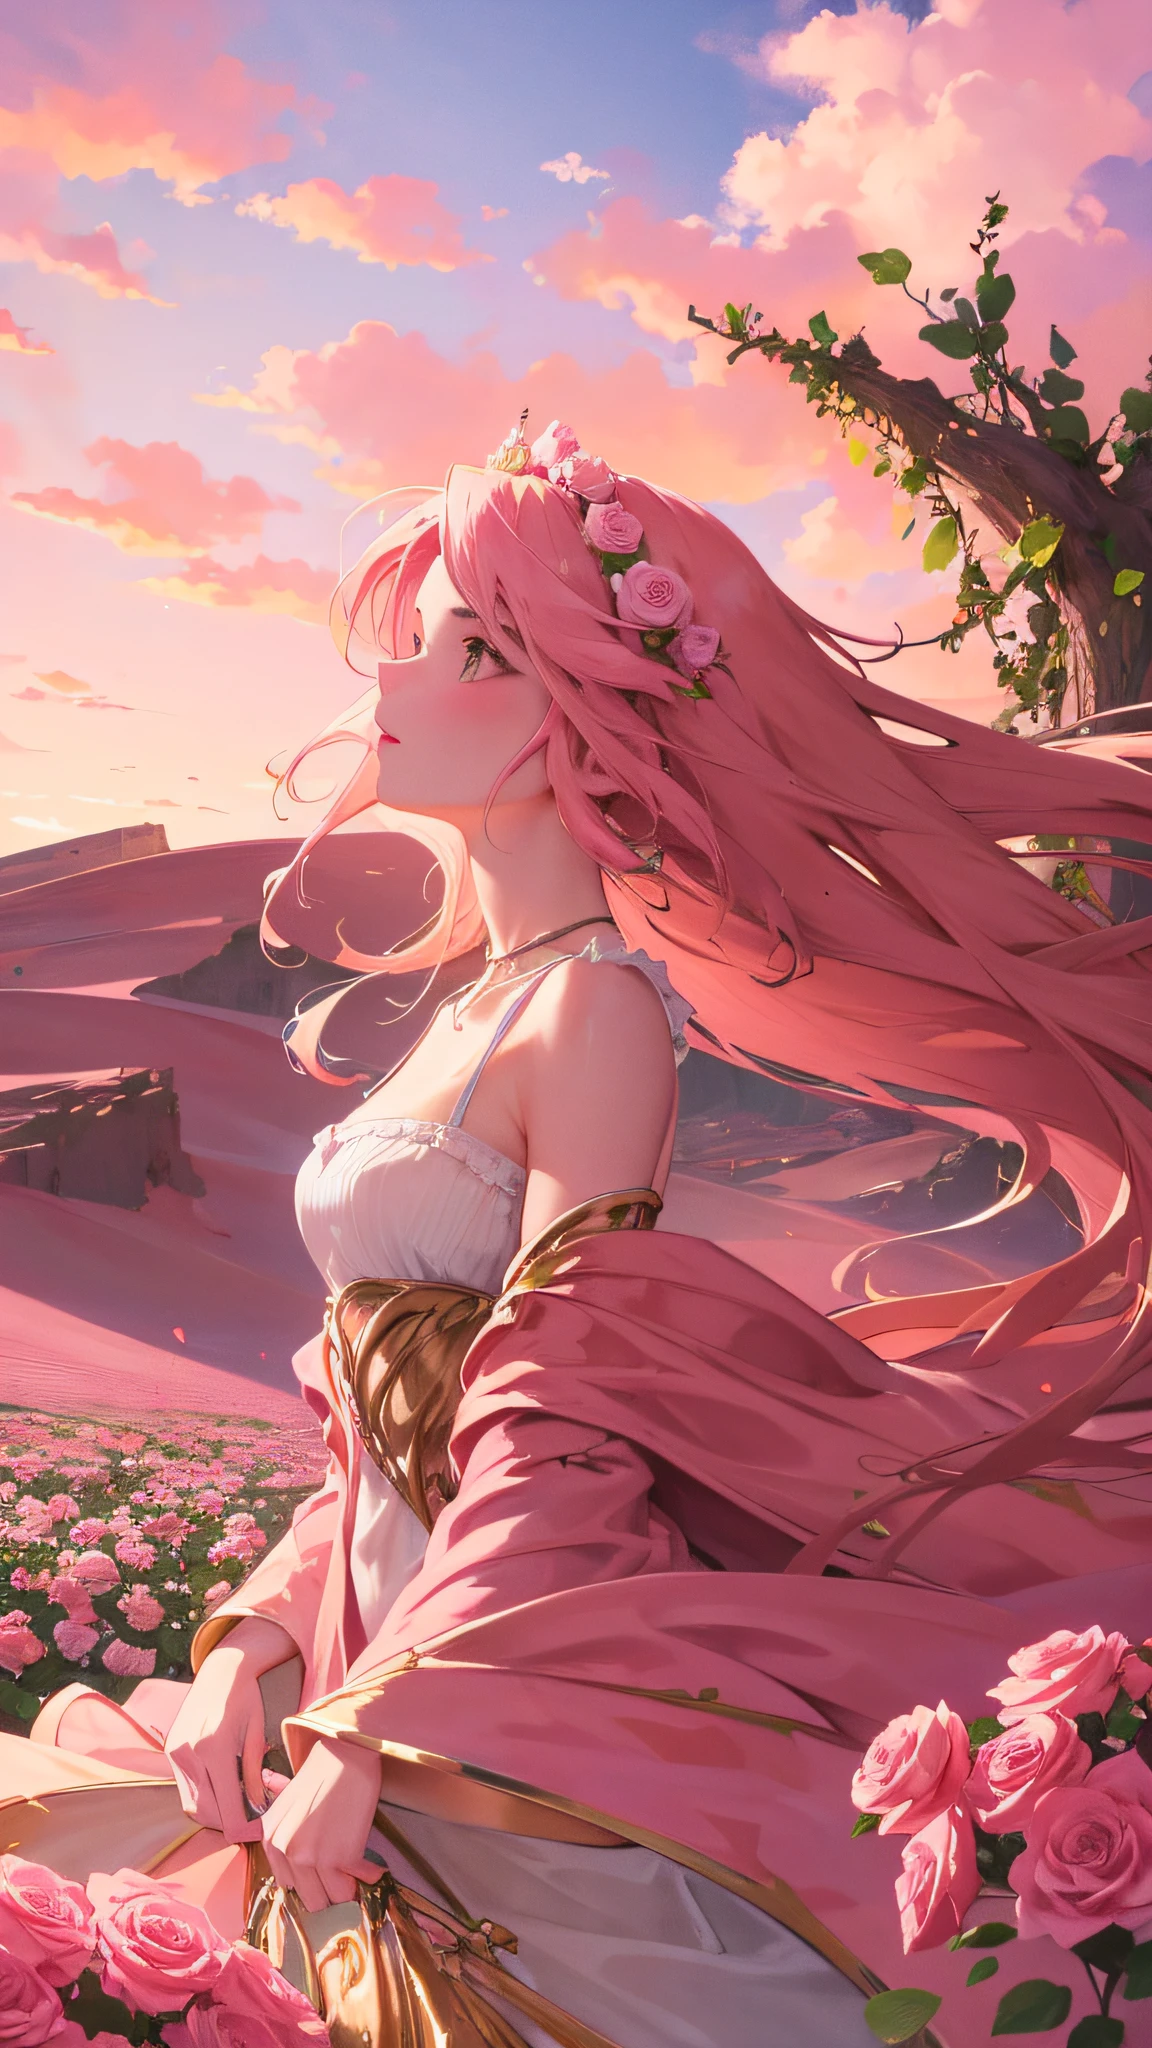 Summer, desert, pink clouds, a land overgrown with roses stands beautiful girl, James Gurney, art station rendered, ultra-wide lens, high definition